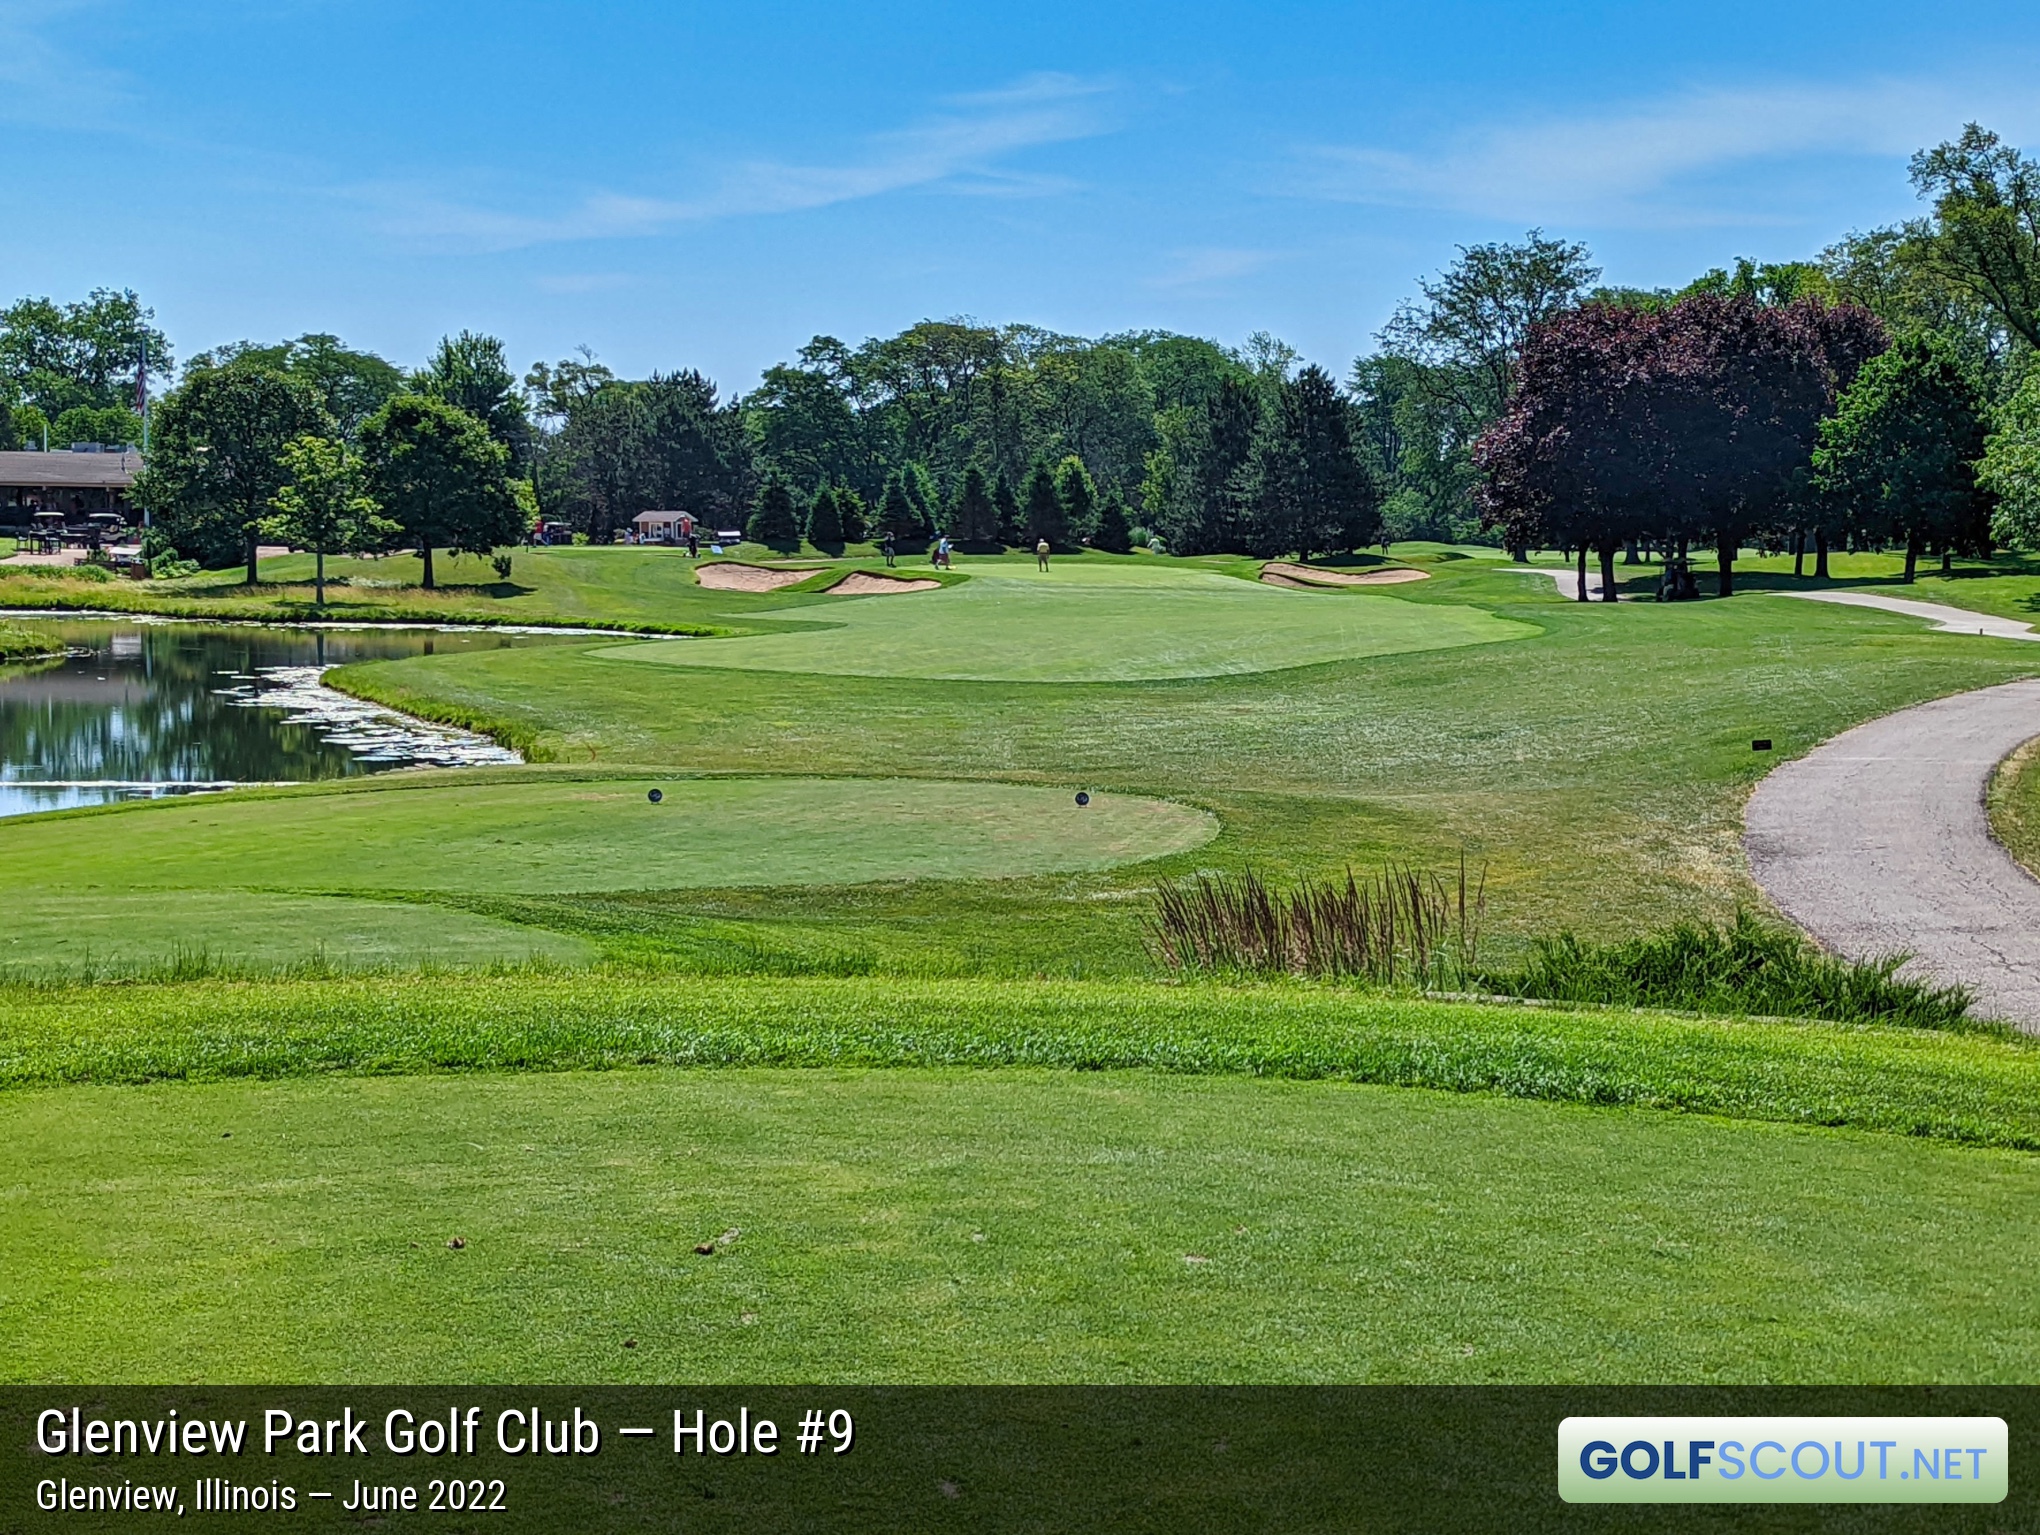 Photo of hole #9 at Glenview Park Golf Club in Glenview, Illinois. 